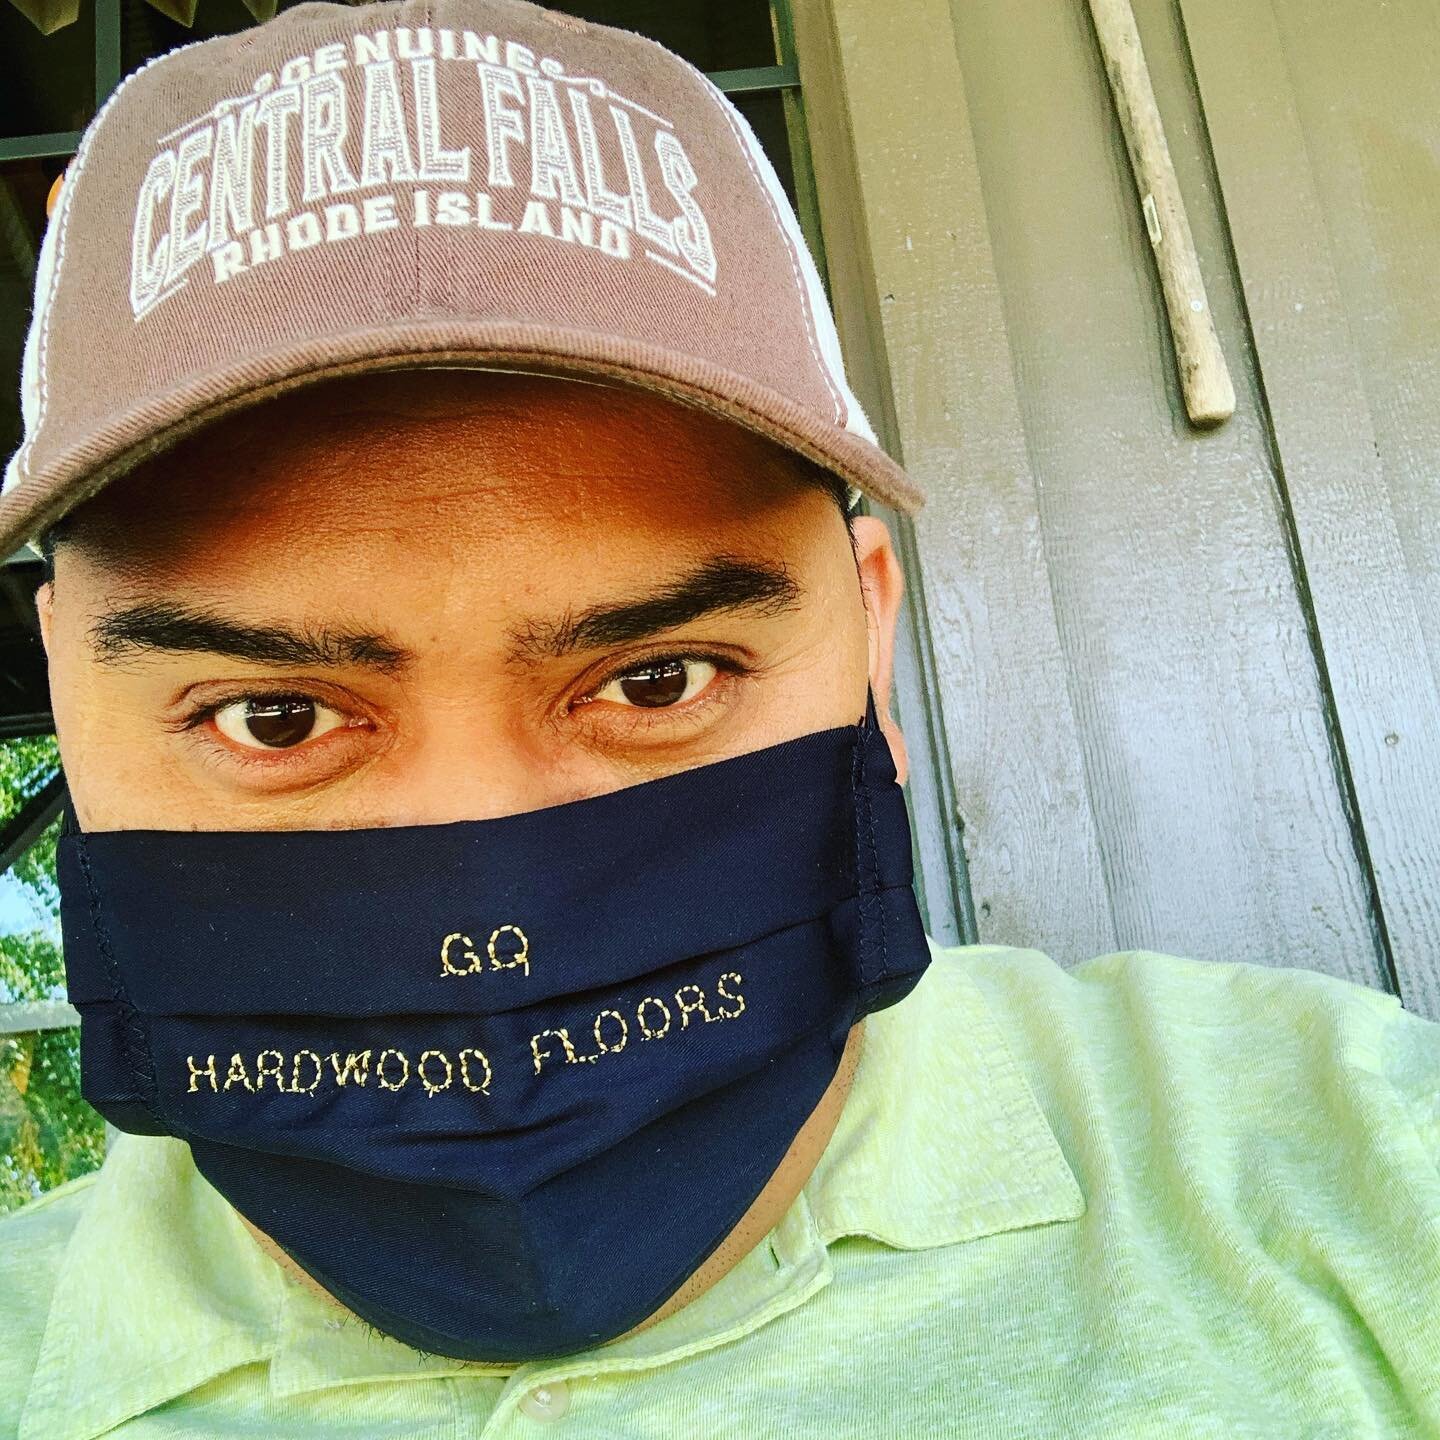 @gq_hardwoodfloors  following the rules and trying to keep you safe . Let&rsquo;s work together and defeat this virus #OneBoardAtaTime #OneMaskAtaTime #gq #gqhardwoodfloors #gqhardwoodfloorsinc #mask #protection #against #covid19 #central #falls #ri 